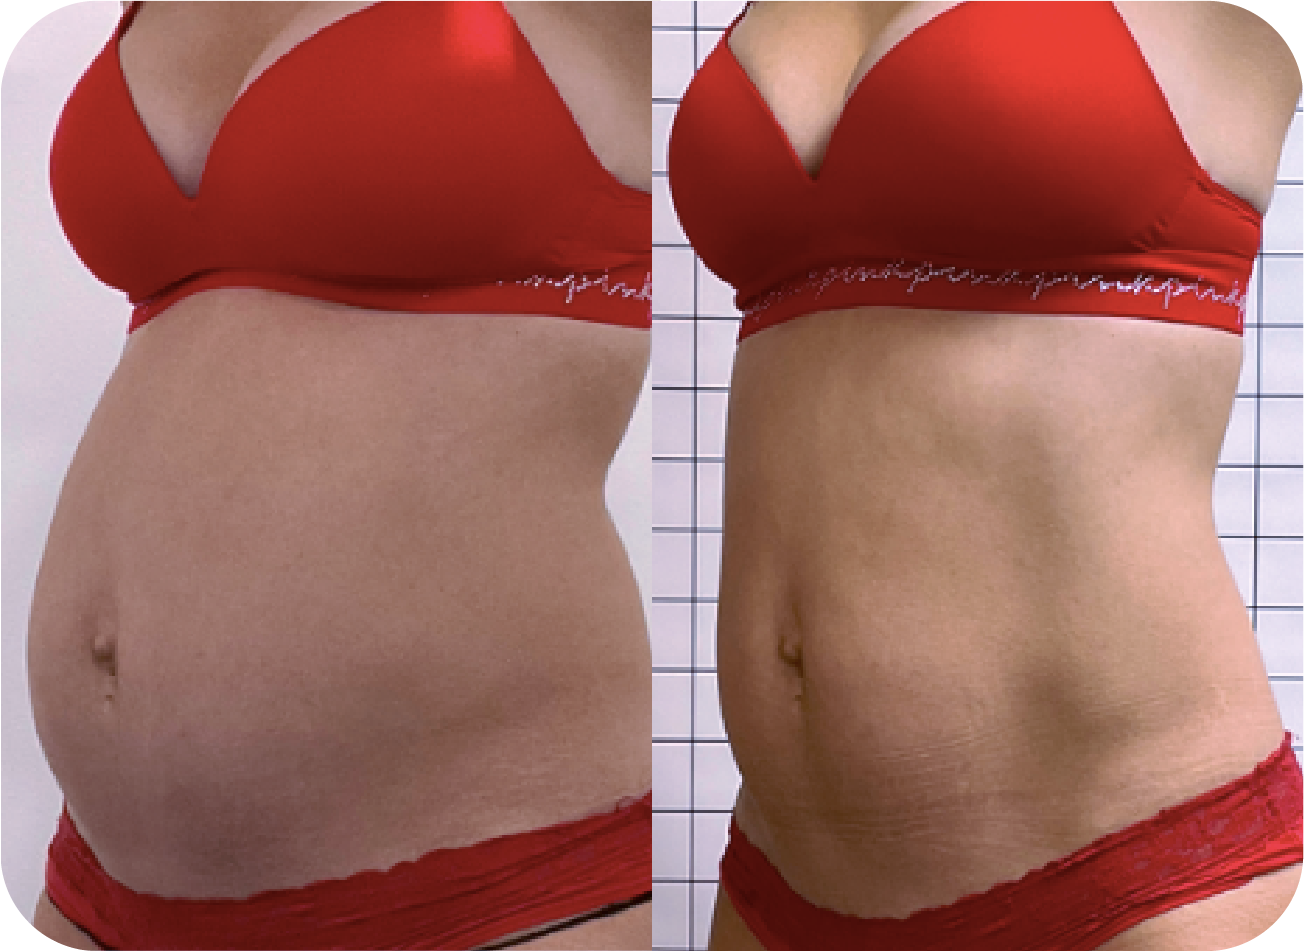 Before and after of a woman after the body shaping treatments at Holos Medical Spa.